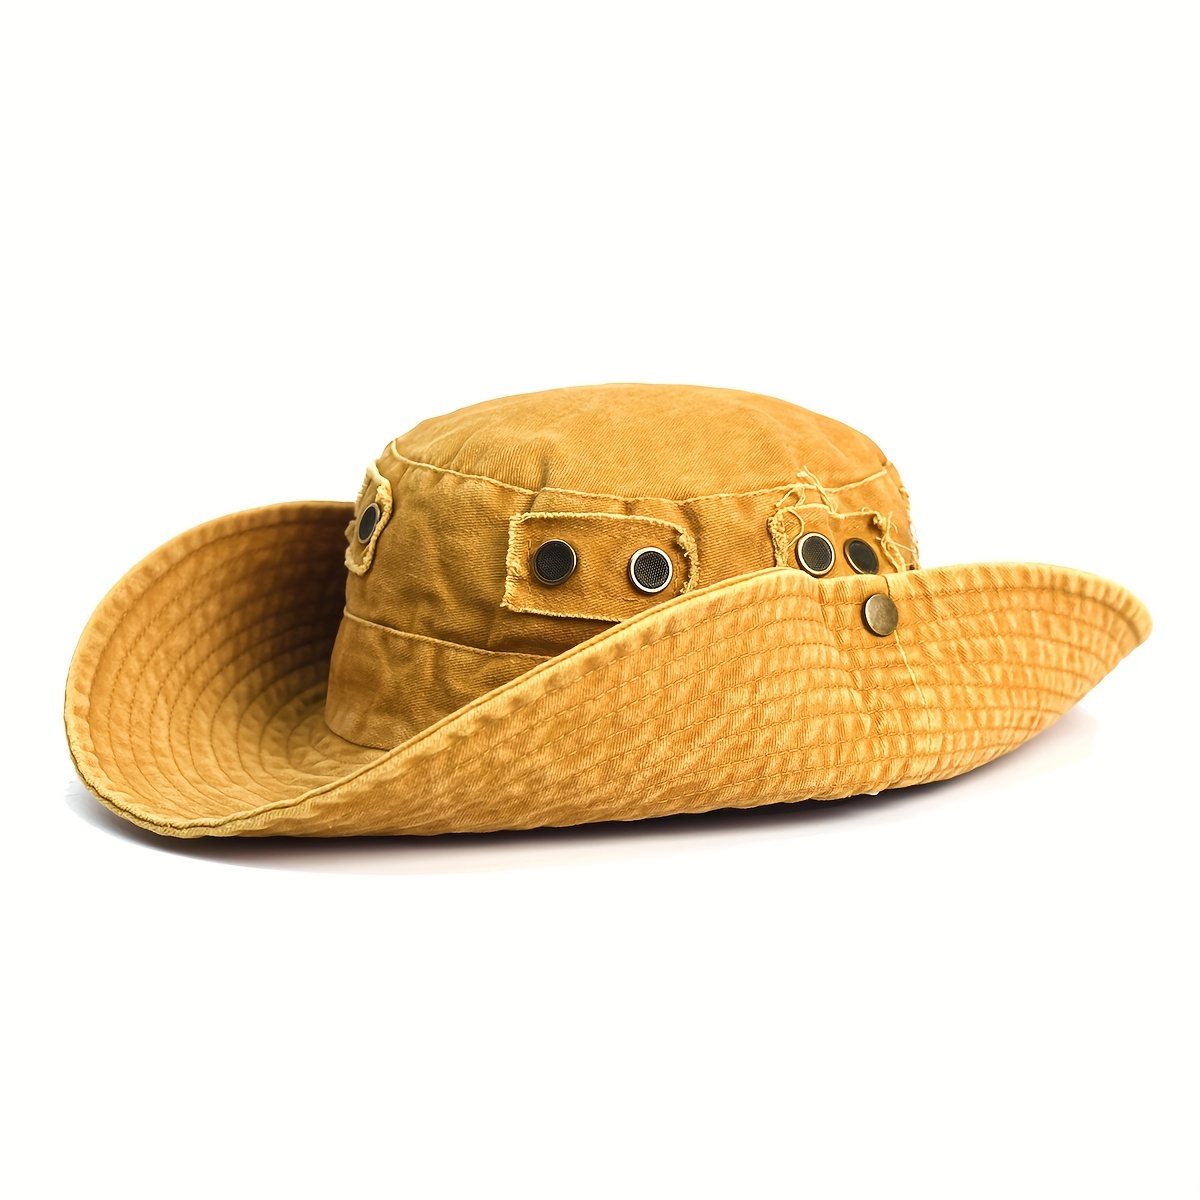 Washed Cotton Boonie Hat With Adjustable Chin Strap For Outdoor Fishing And Hunting  Unisex, Check Out Today's Deals Now